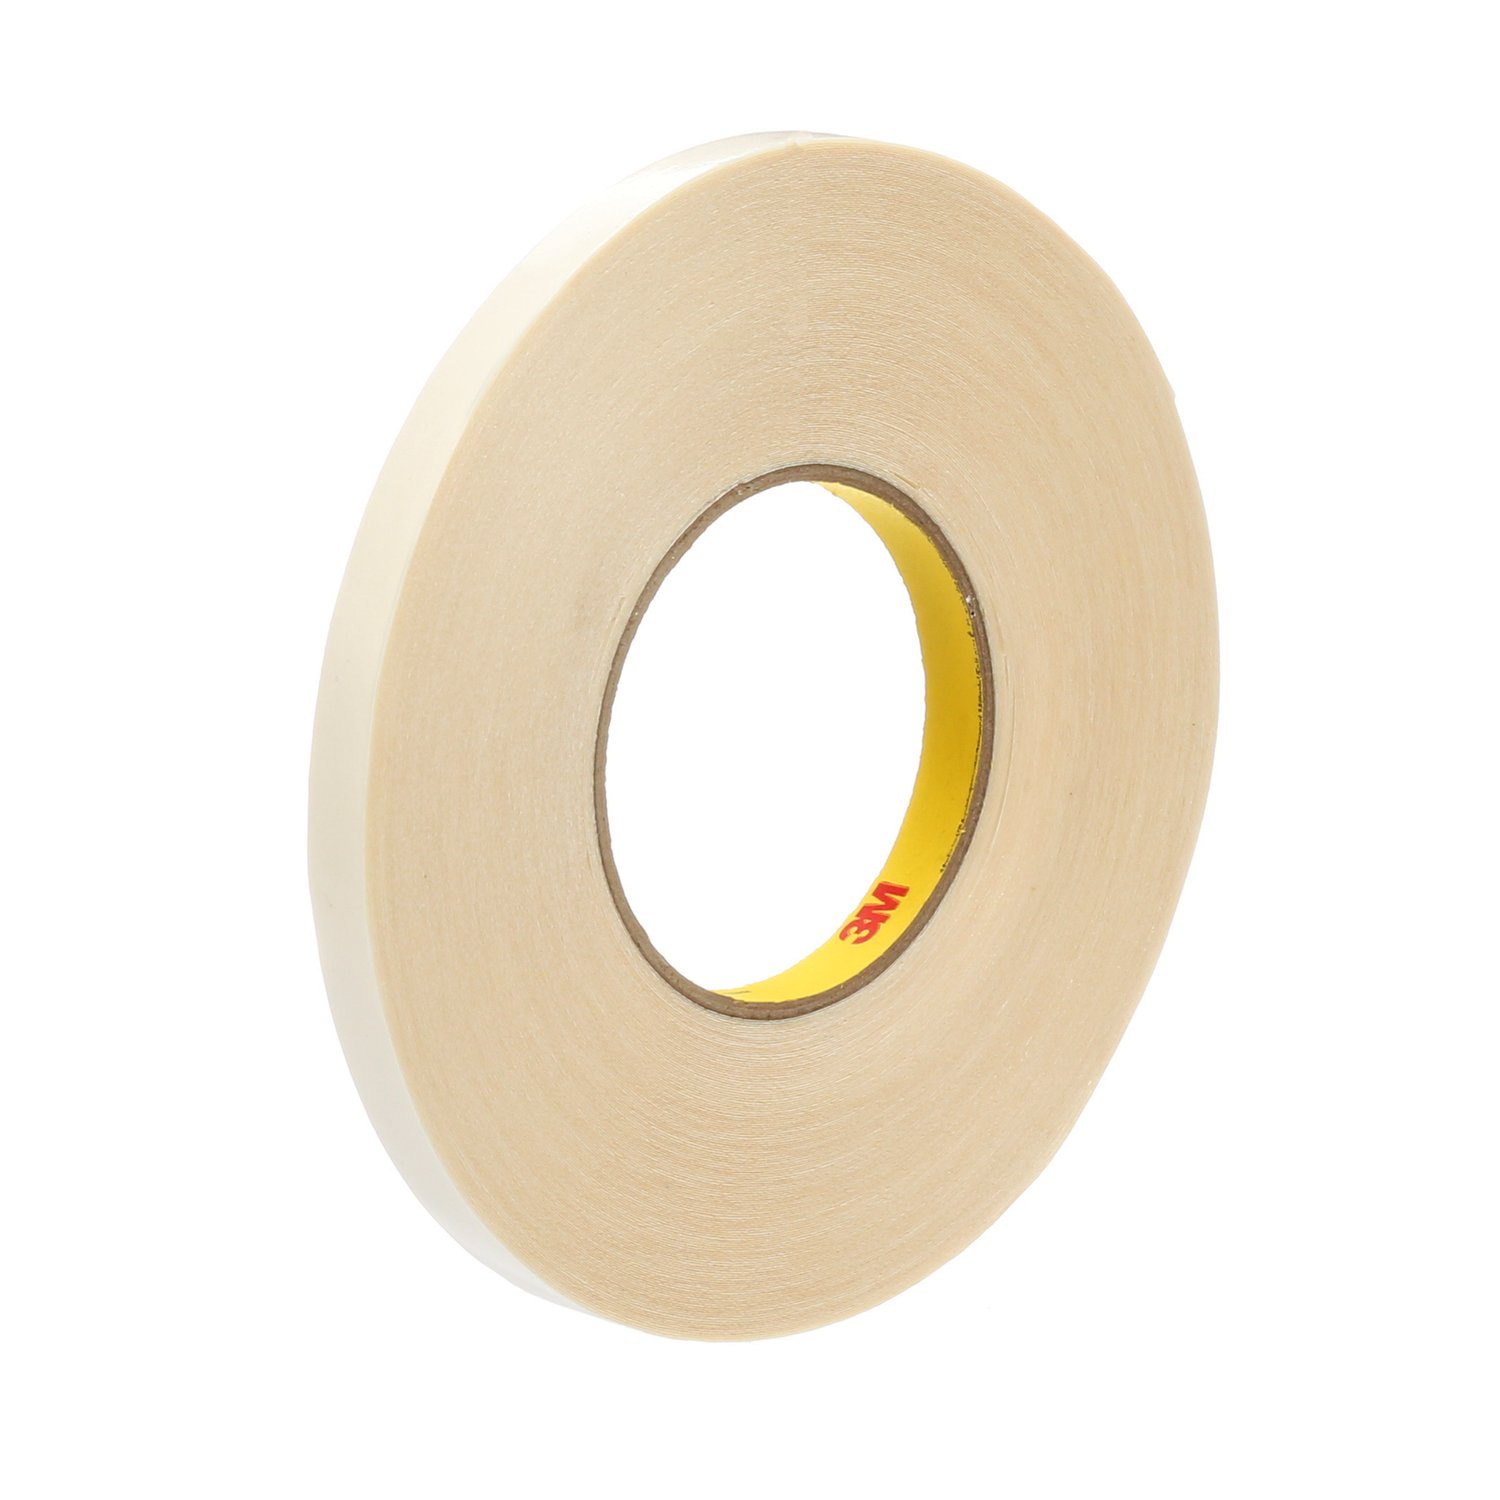 7010313539 - 3M Venture Tape Double Coated PET Tape 514CWR Red, 1575 mm x 50 m,
0.01 mm, 1 roll per case, Untrimmed Log